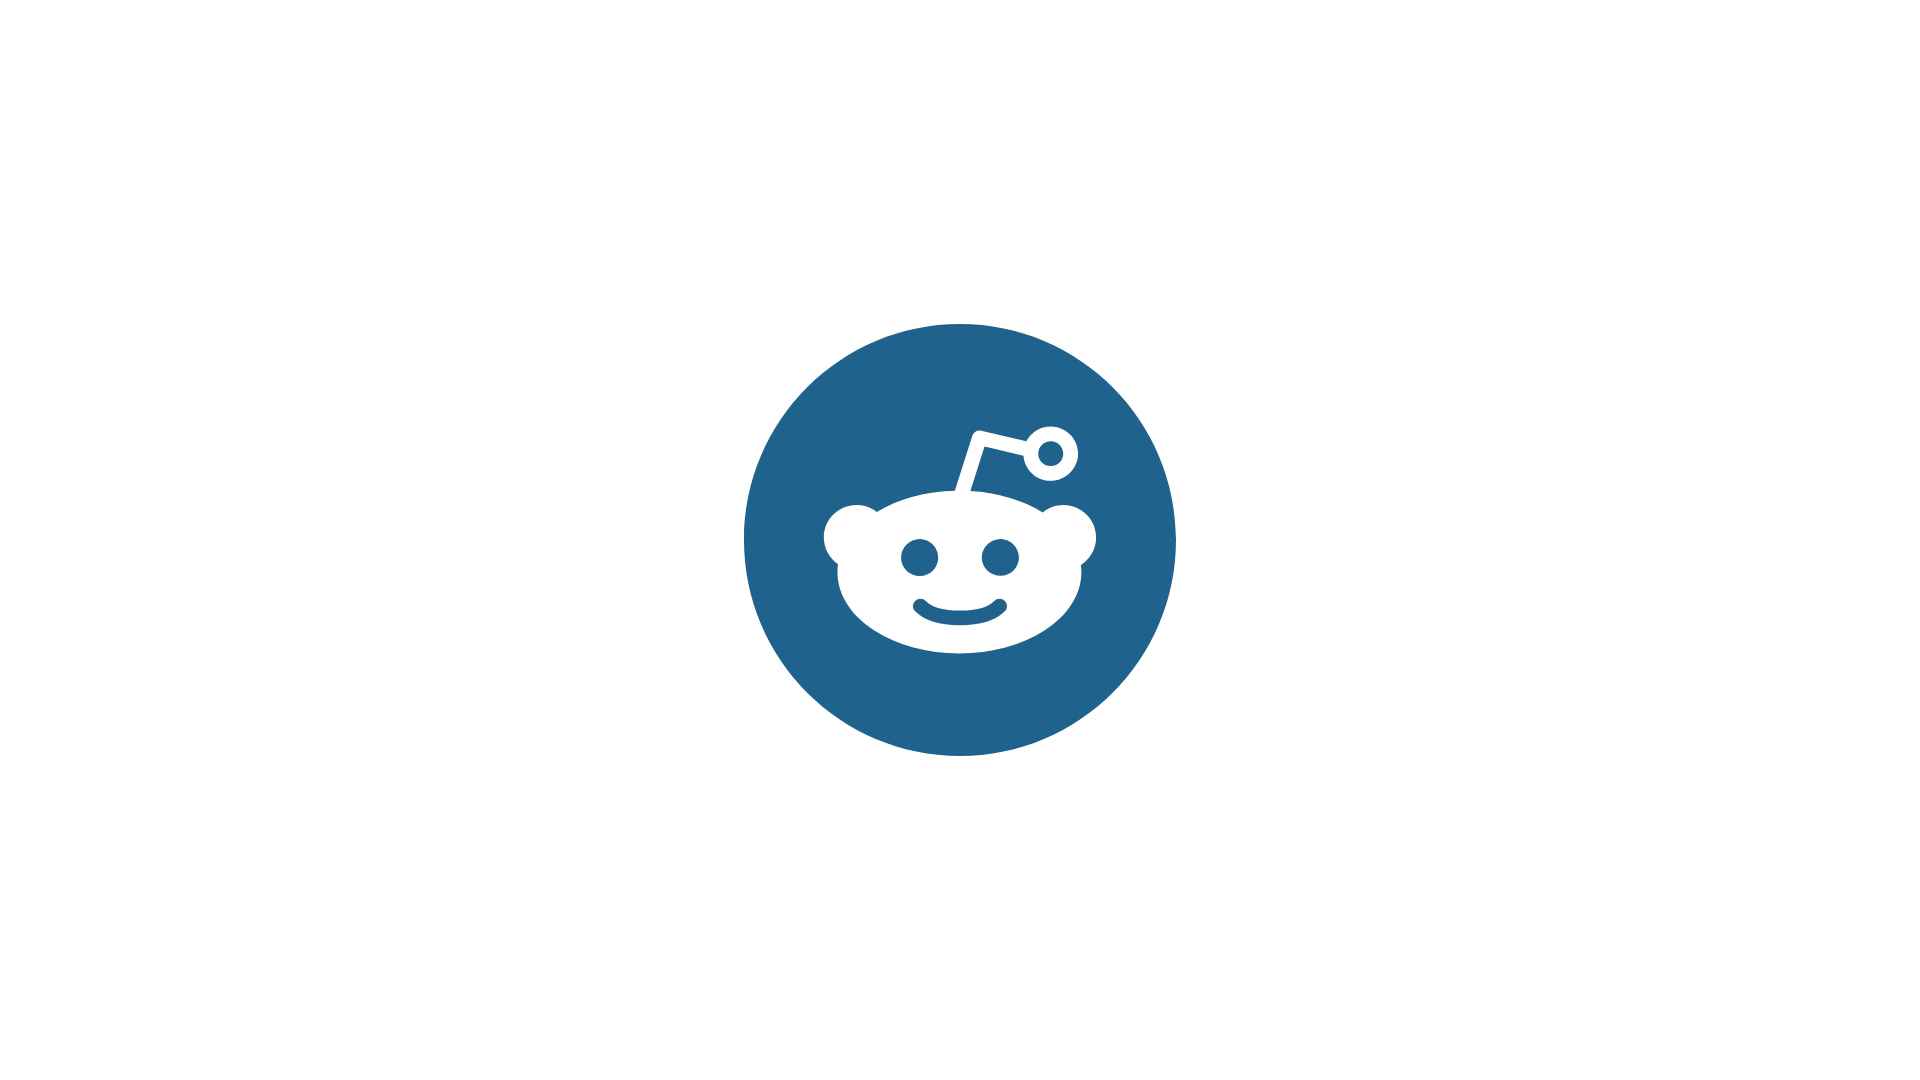 Are there any privacy concerns or precautions that users should be aware of when using Reddit?